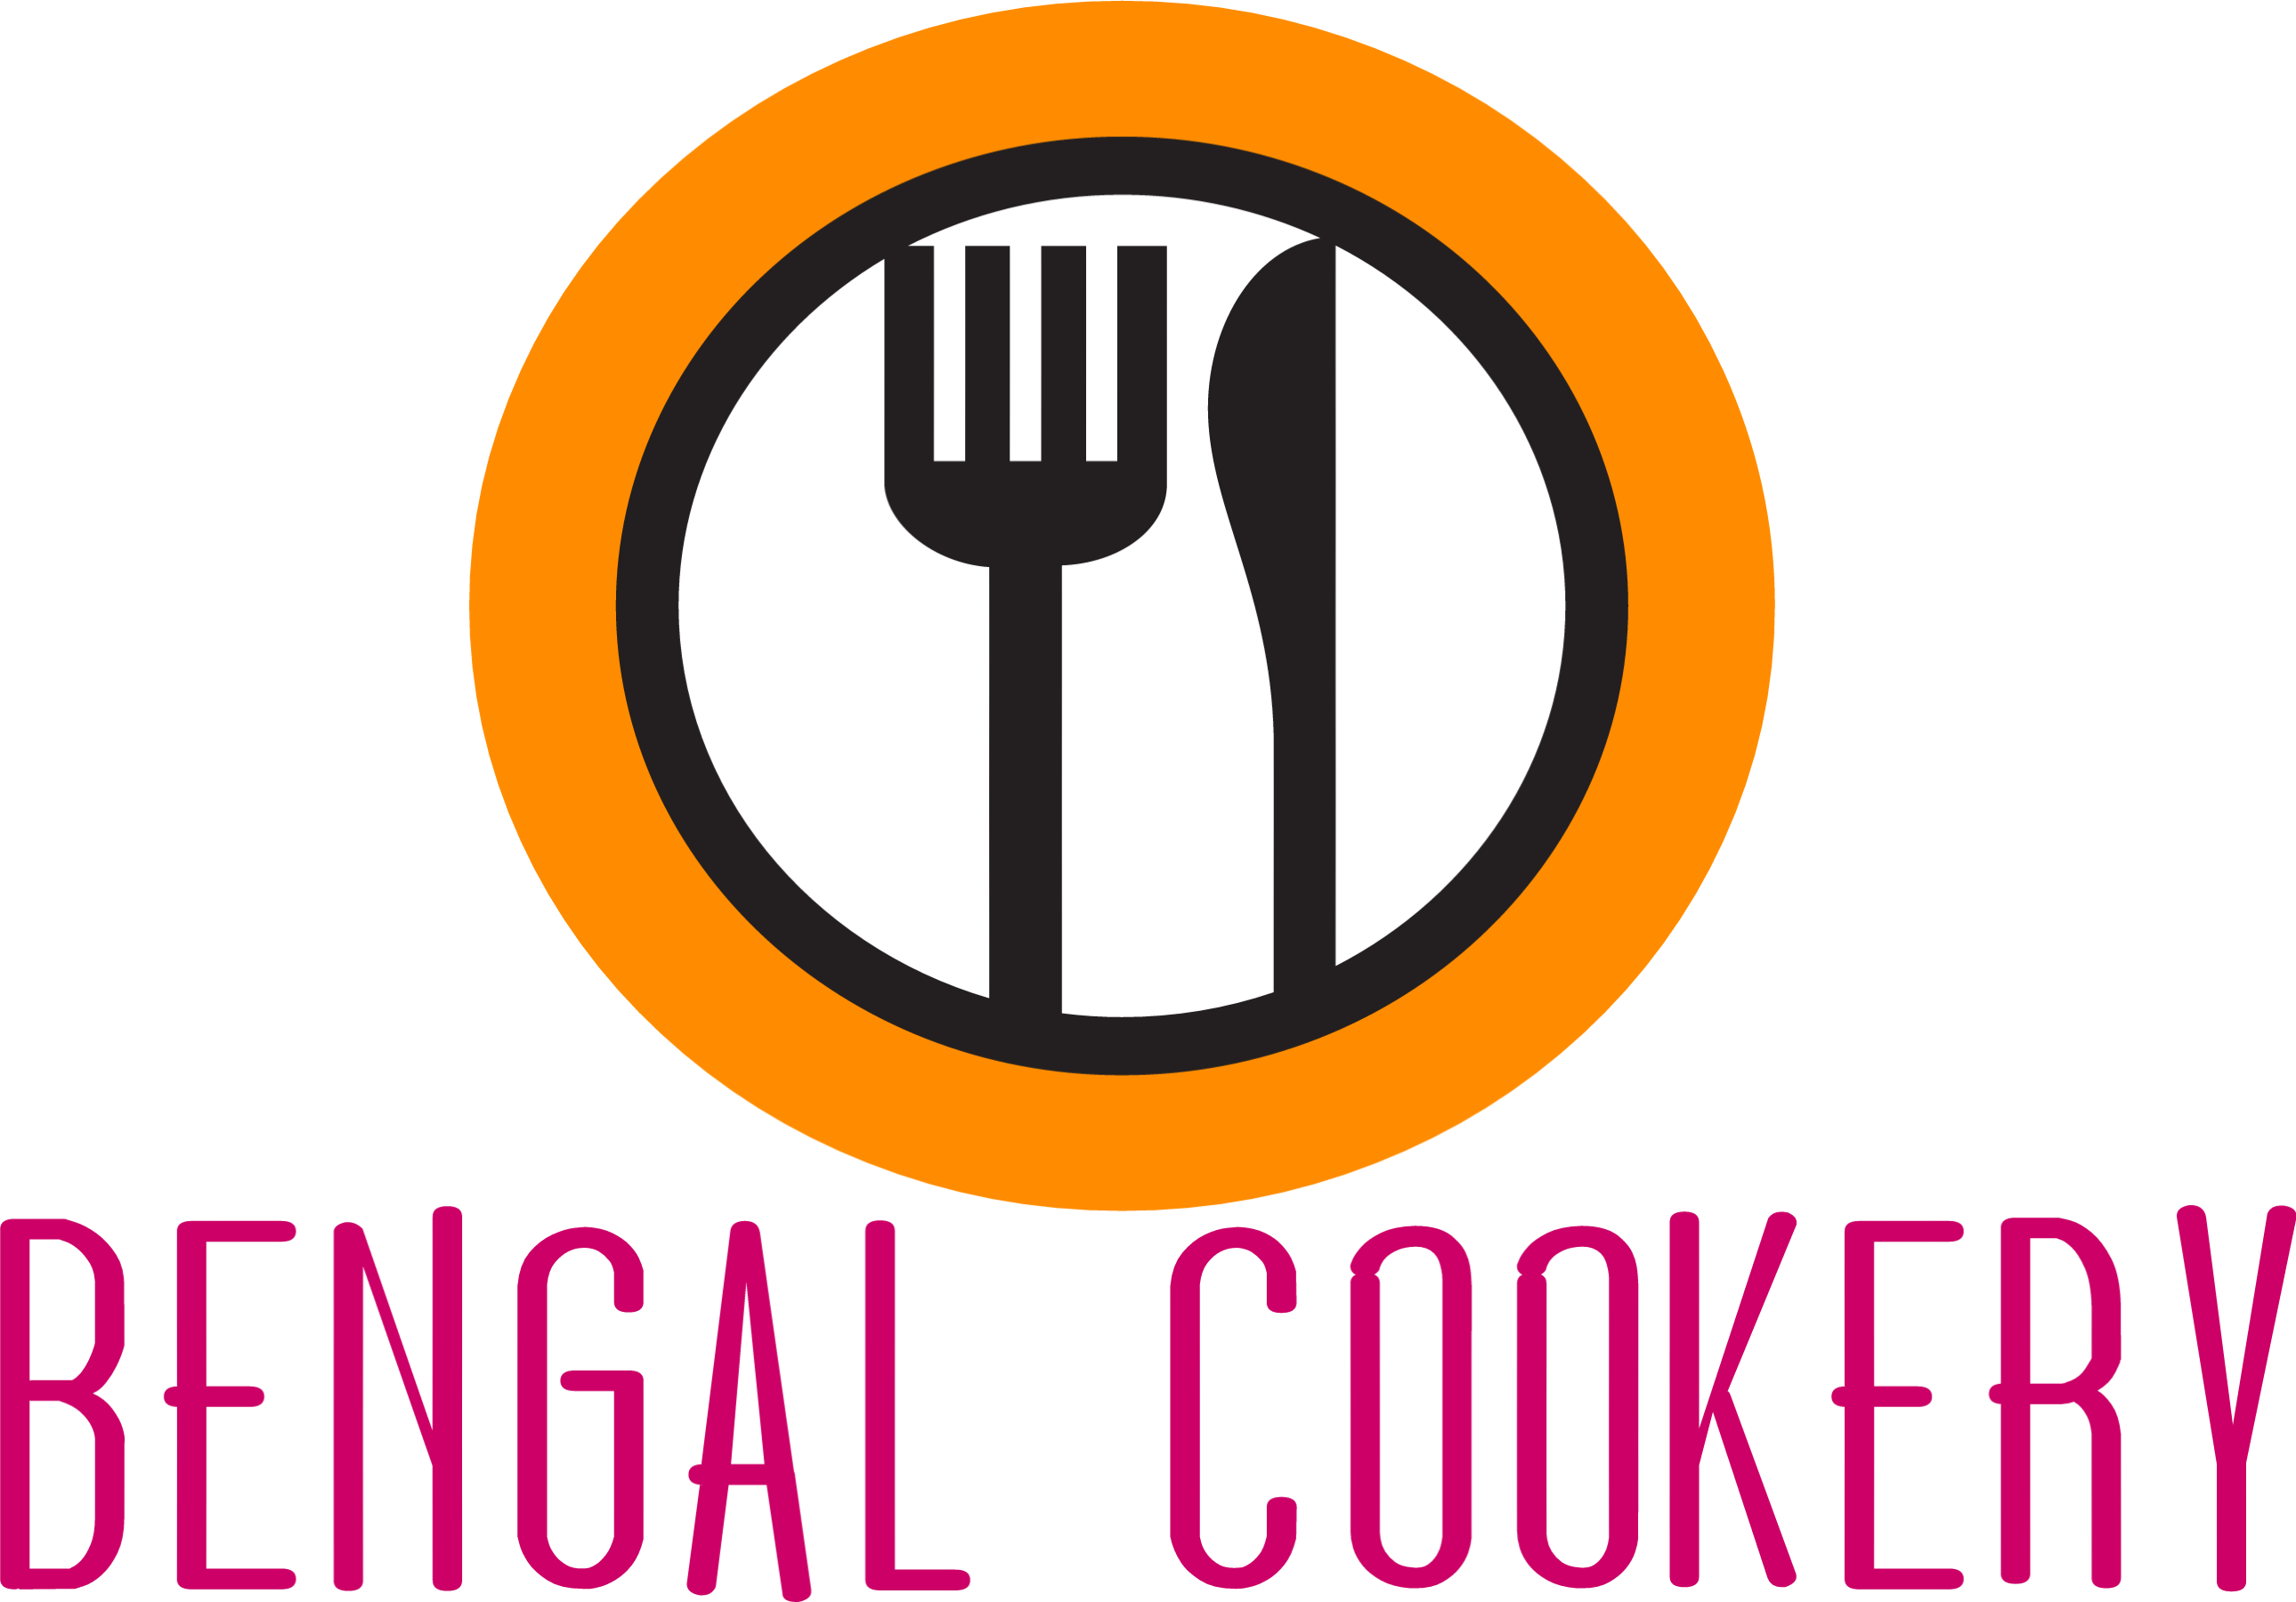 Bengal Cookery